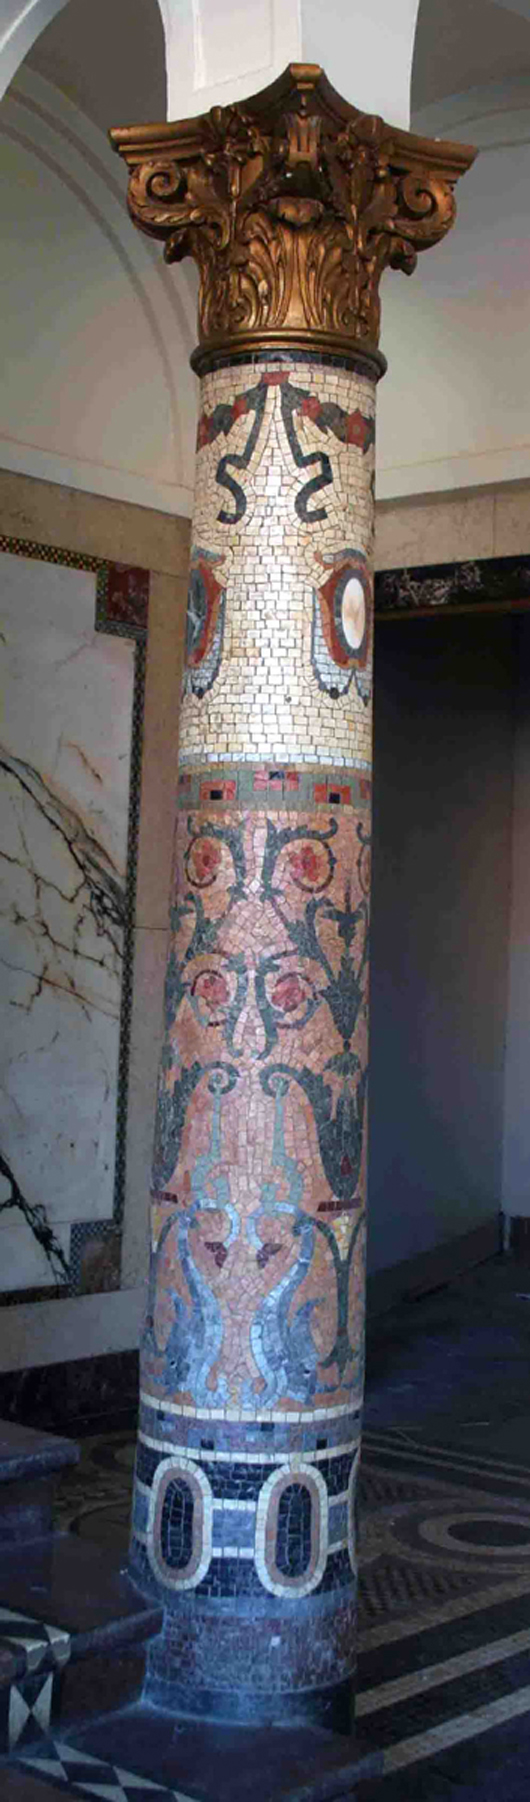 One of a pair of mosaic columns salvaged. Image courtesy of Wooden Nickel Antiques.